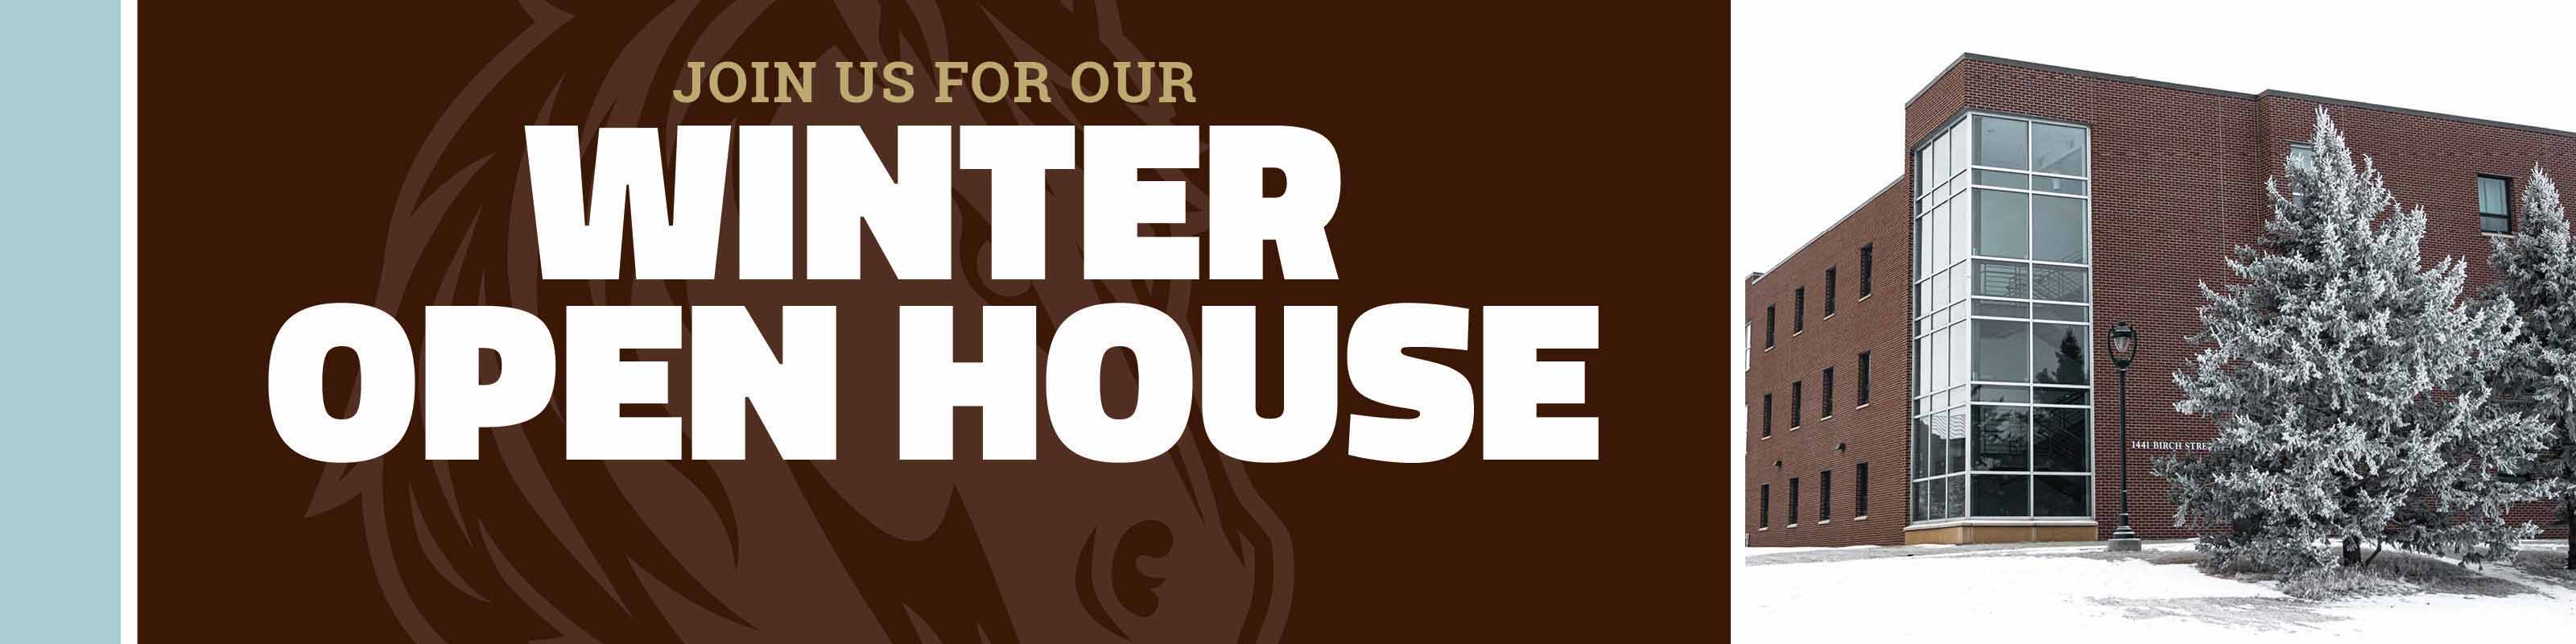 Join us for our Winter Open House